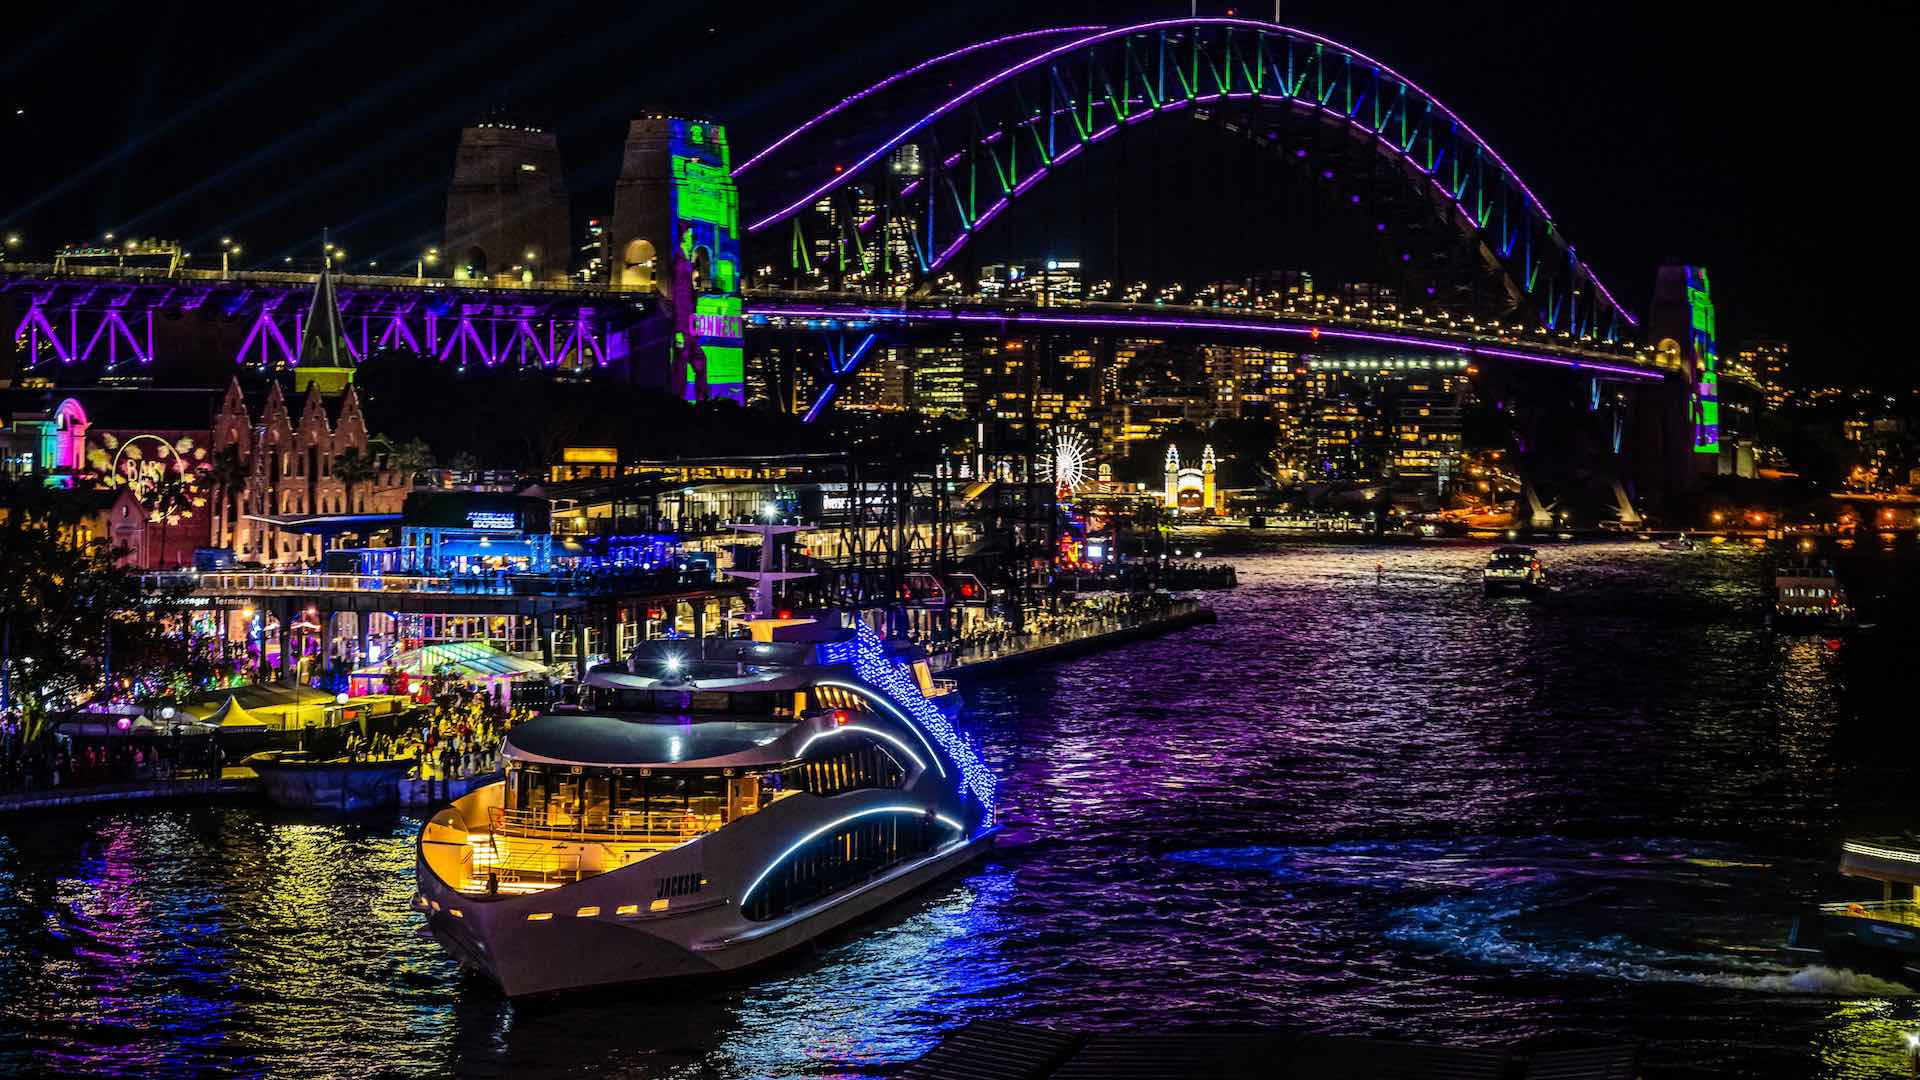 You Can Win an Exclusive Vivid Sydney Degustation Dinner by Celebrity Chefs Onboard a Superyacht